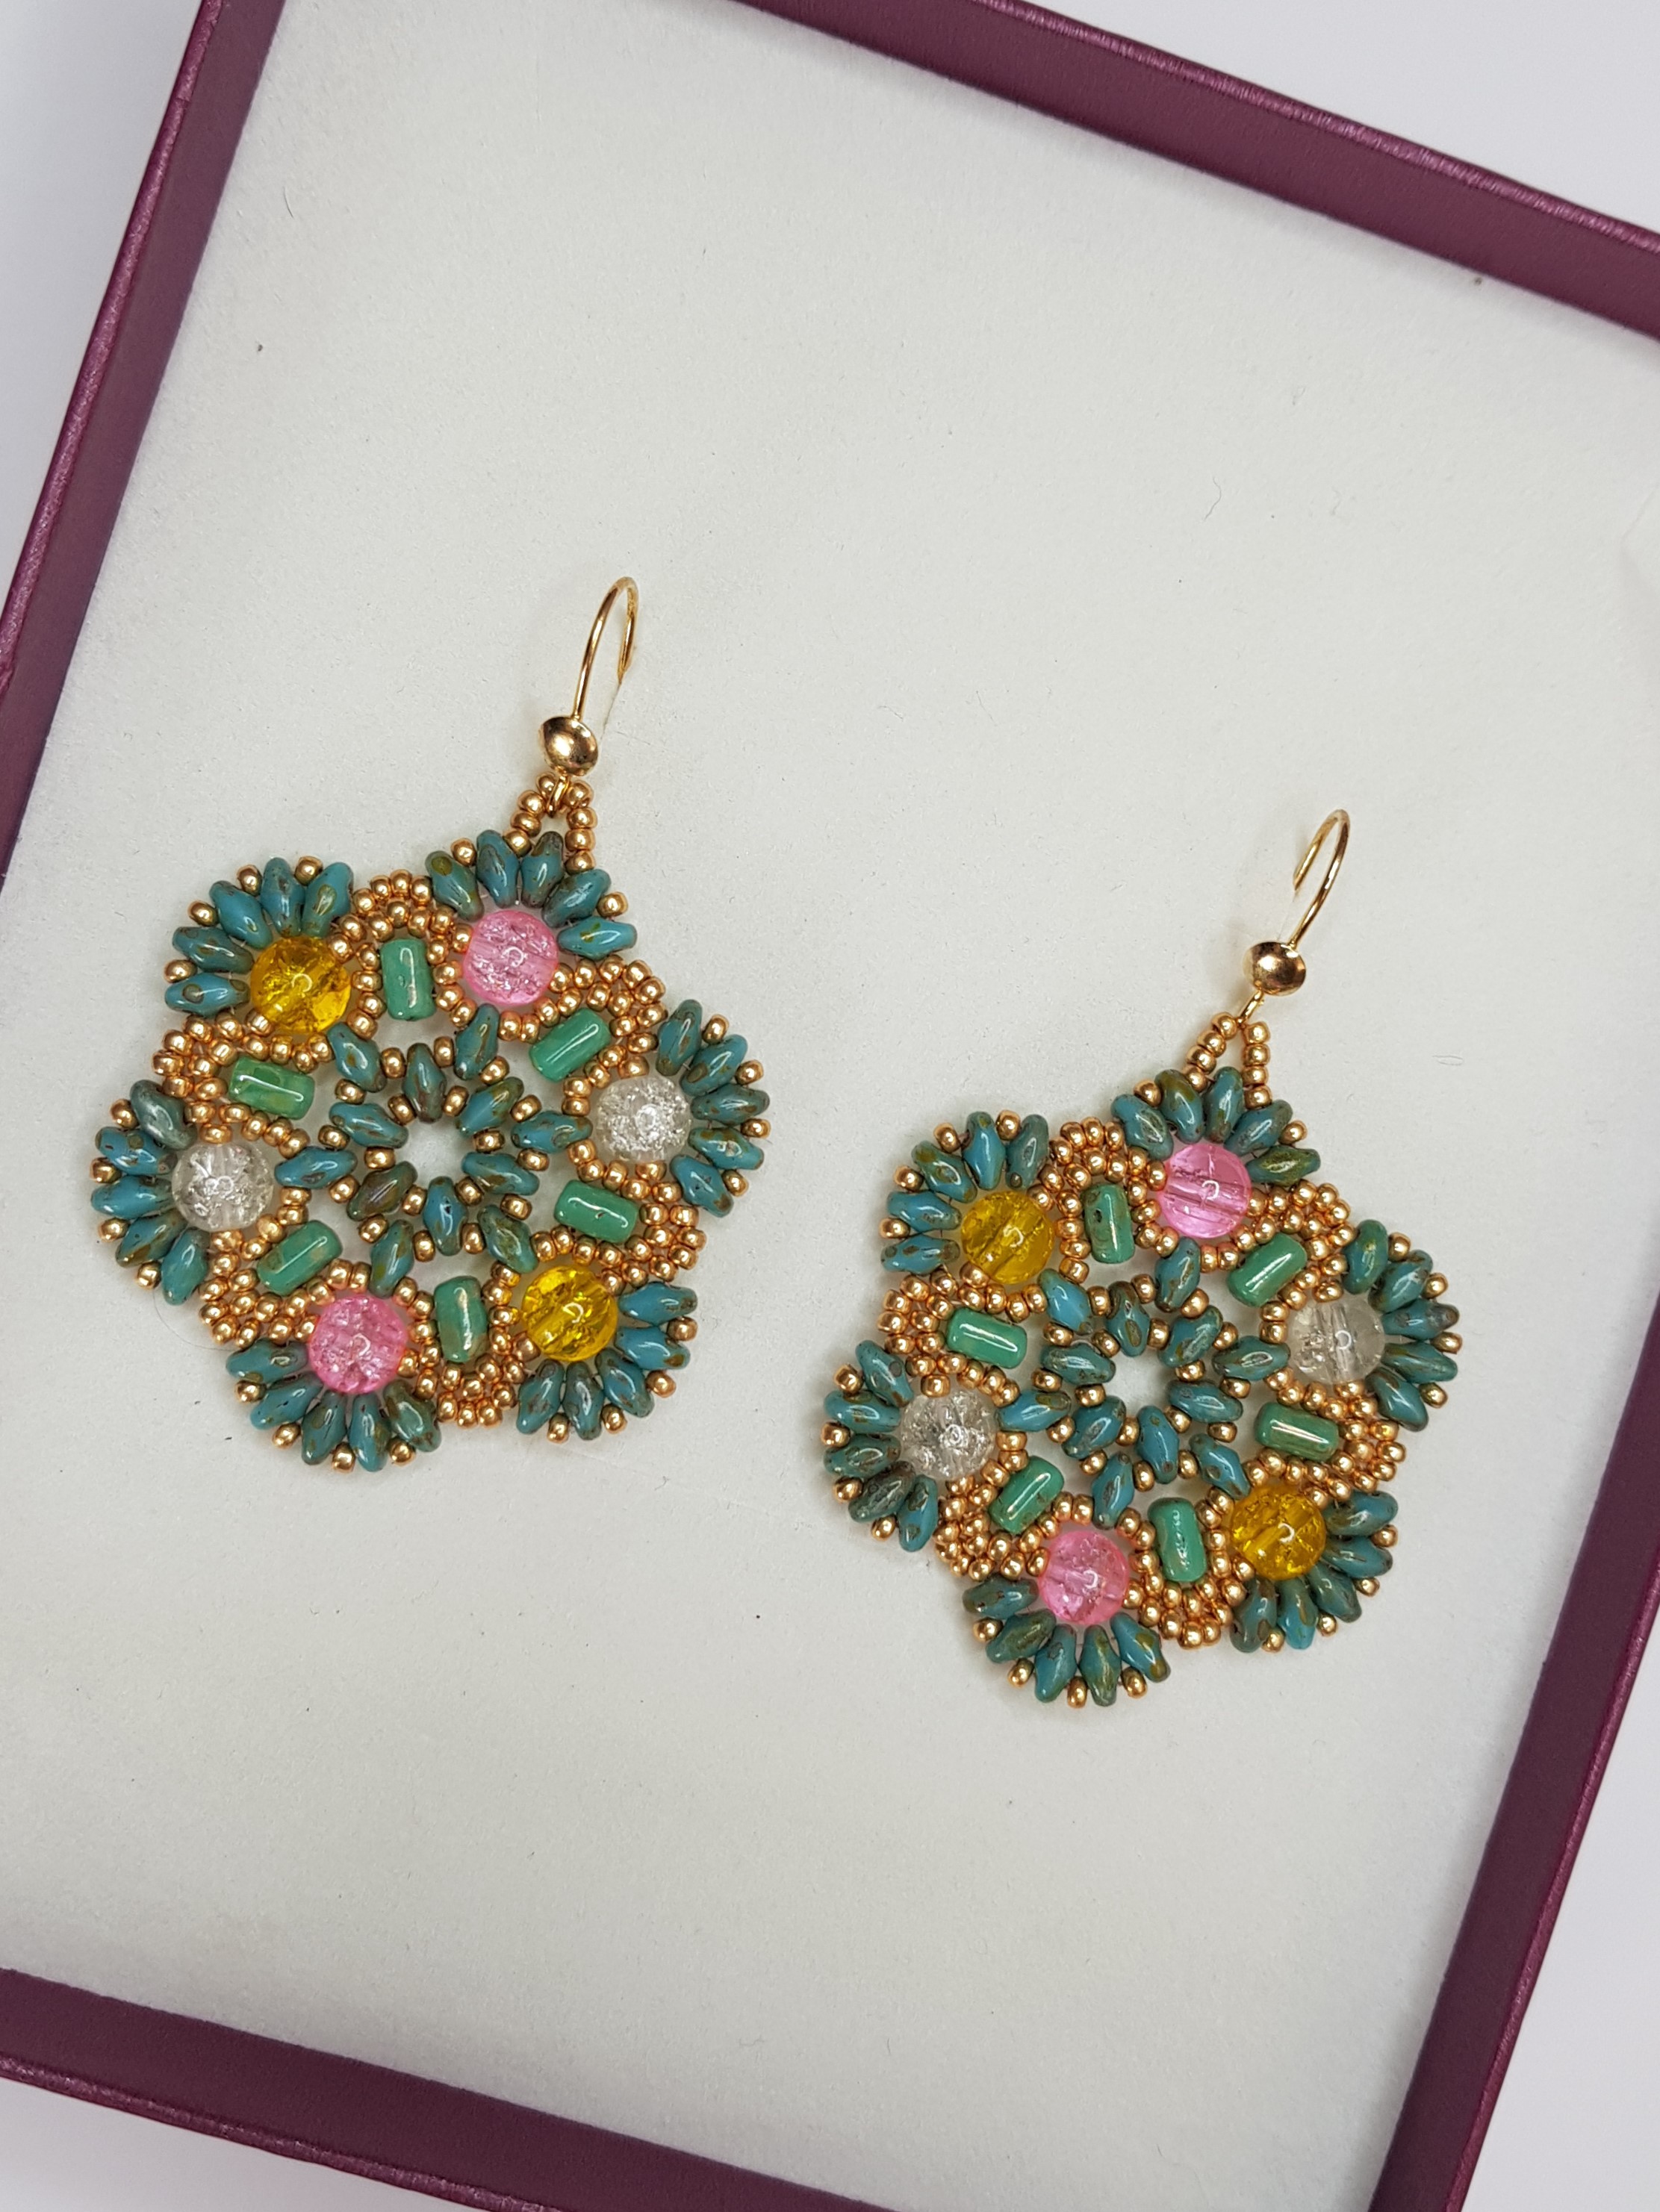 Picasso - Turquoise pendant earrings